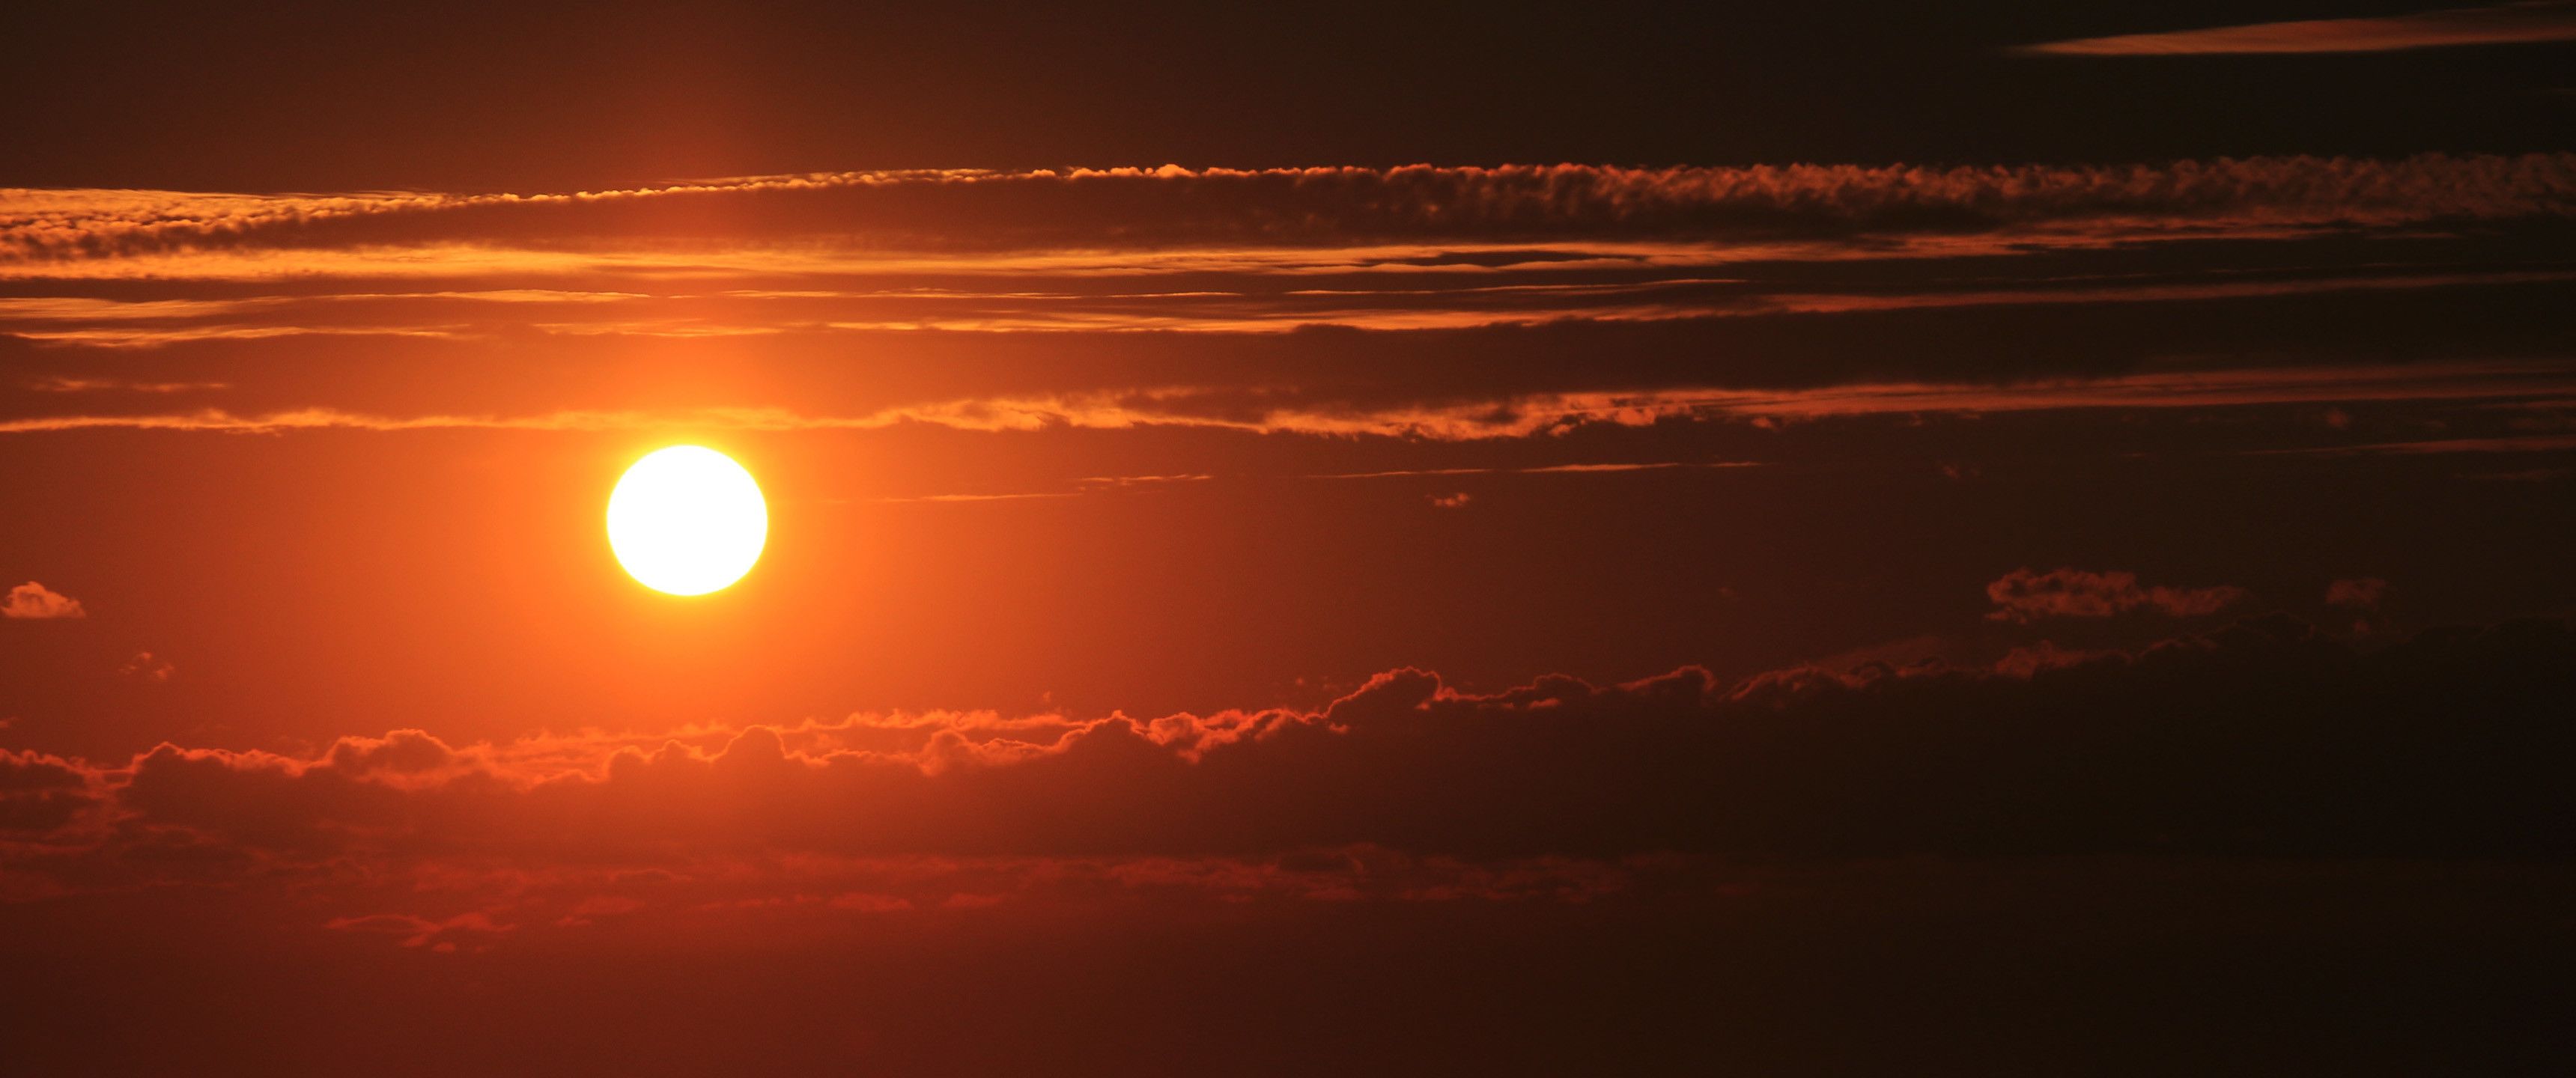 A sun setting behind a layer of clouds. - 3440x1440